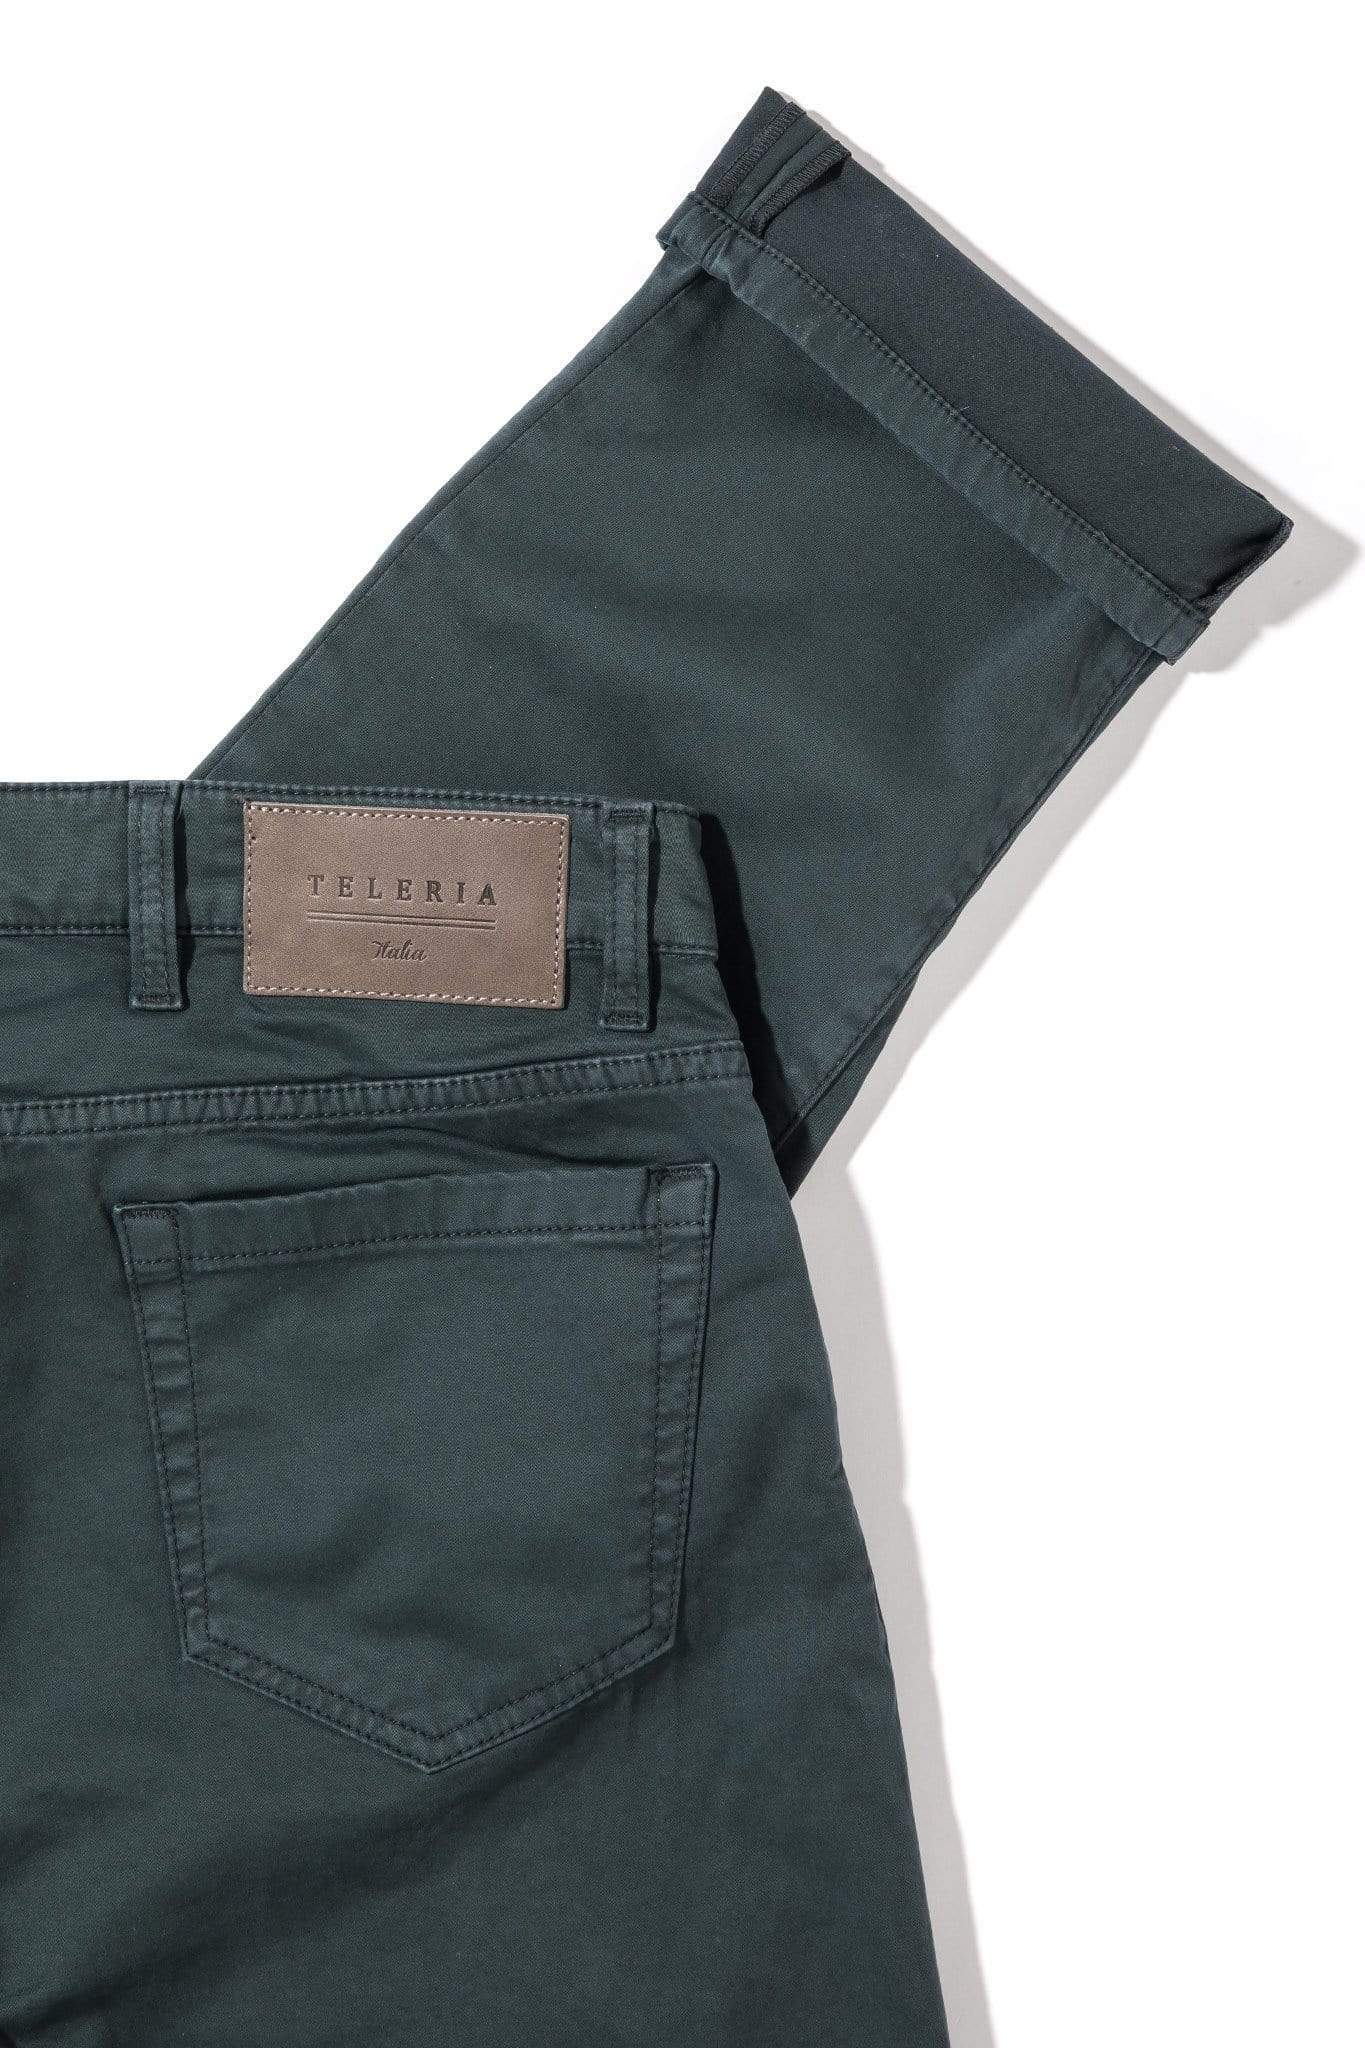 Yuma Soft Touch In Verde Loden | Mens - Pants - 5 Pocket | Teleria Zed